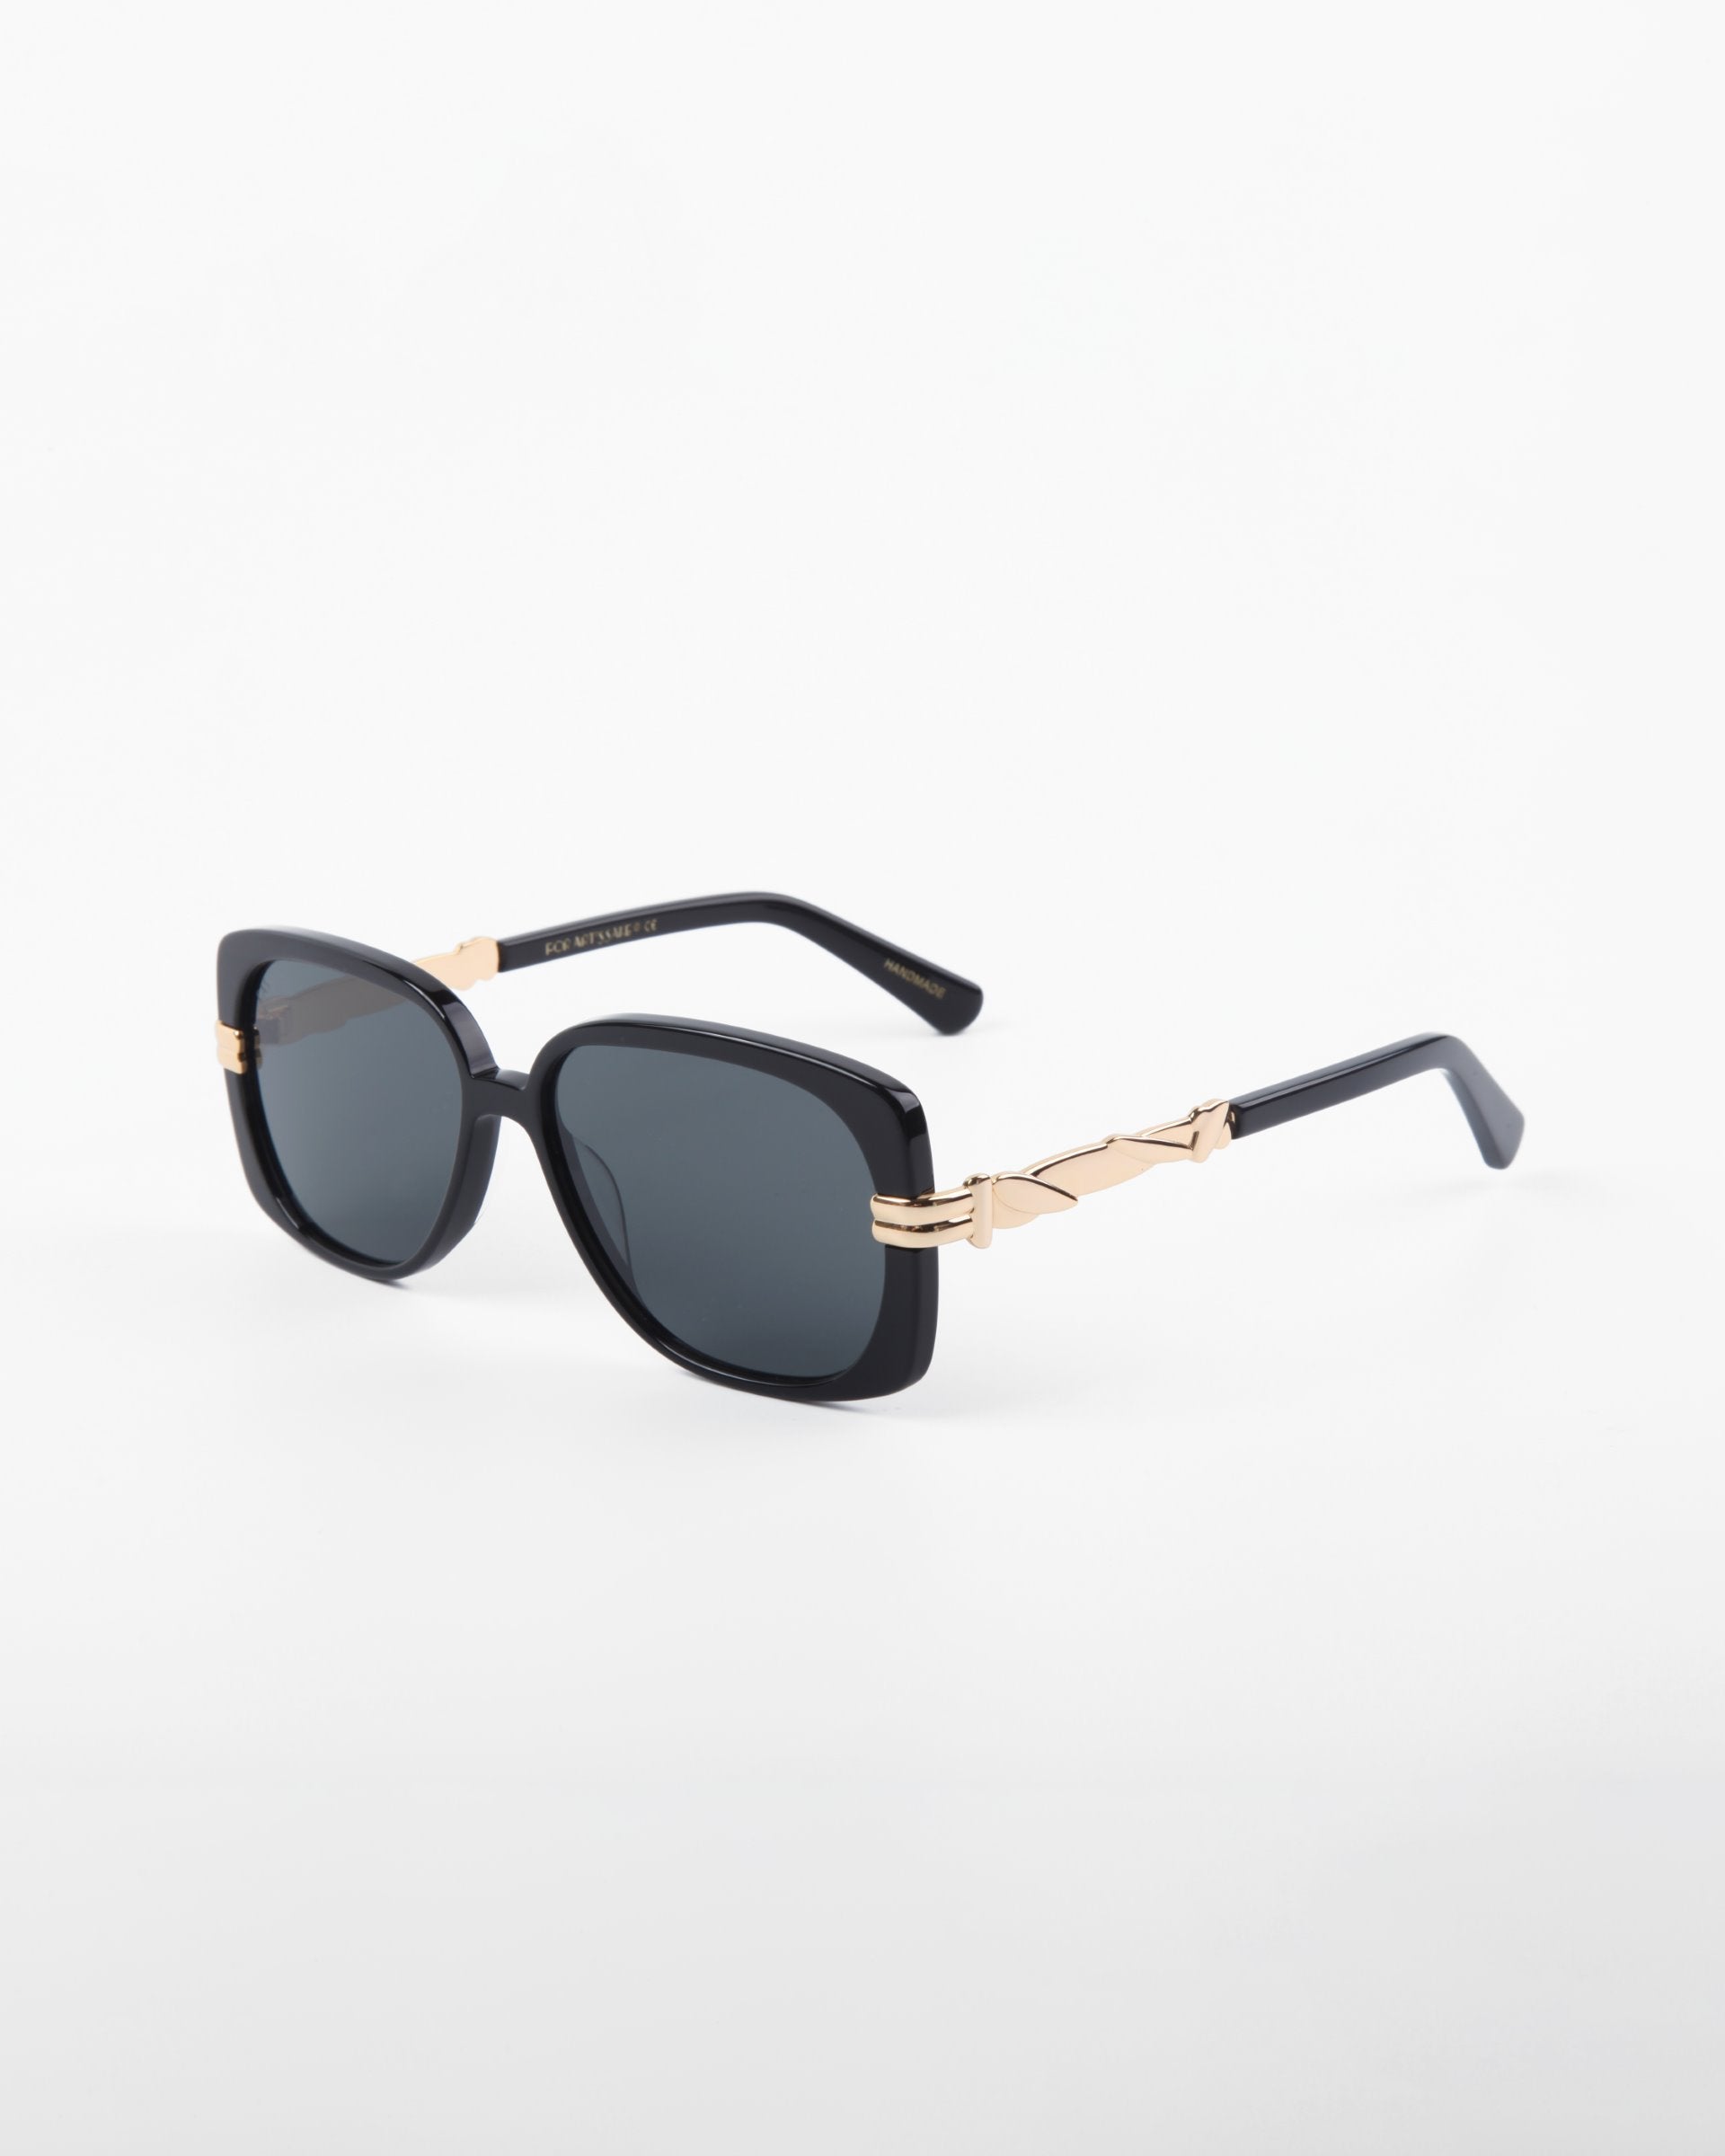 A pair of black square-framed Icon sunglasses by For Art&#39;s Sake® with dark, shatter-resistant nylon lenses. The temples feature gold accents near the hinges. Offering UVA &amp; UVB protection, they are perfect for sunny days. The background is plain and white.